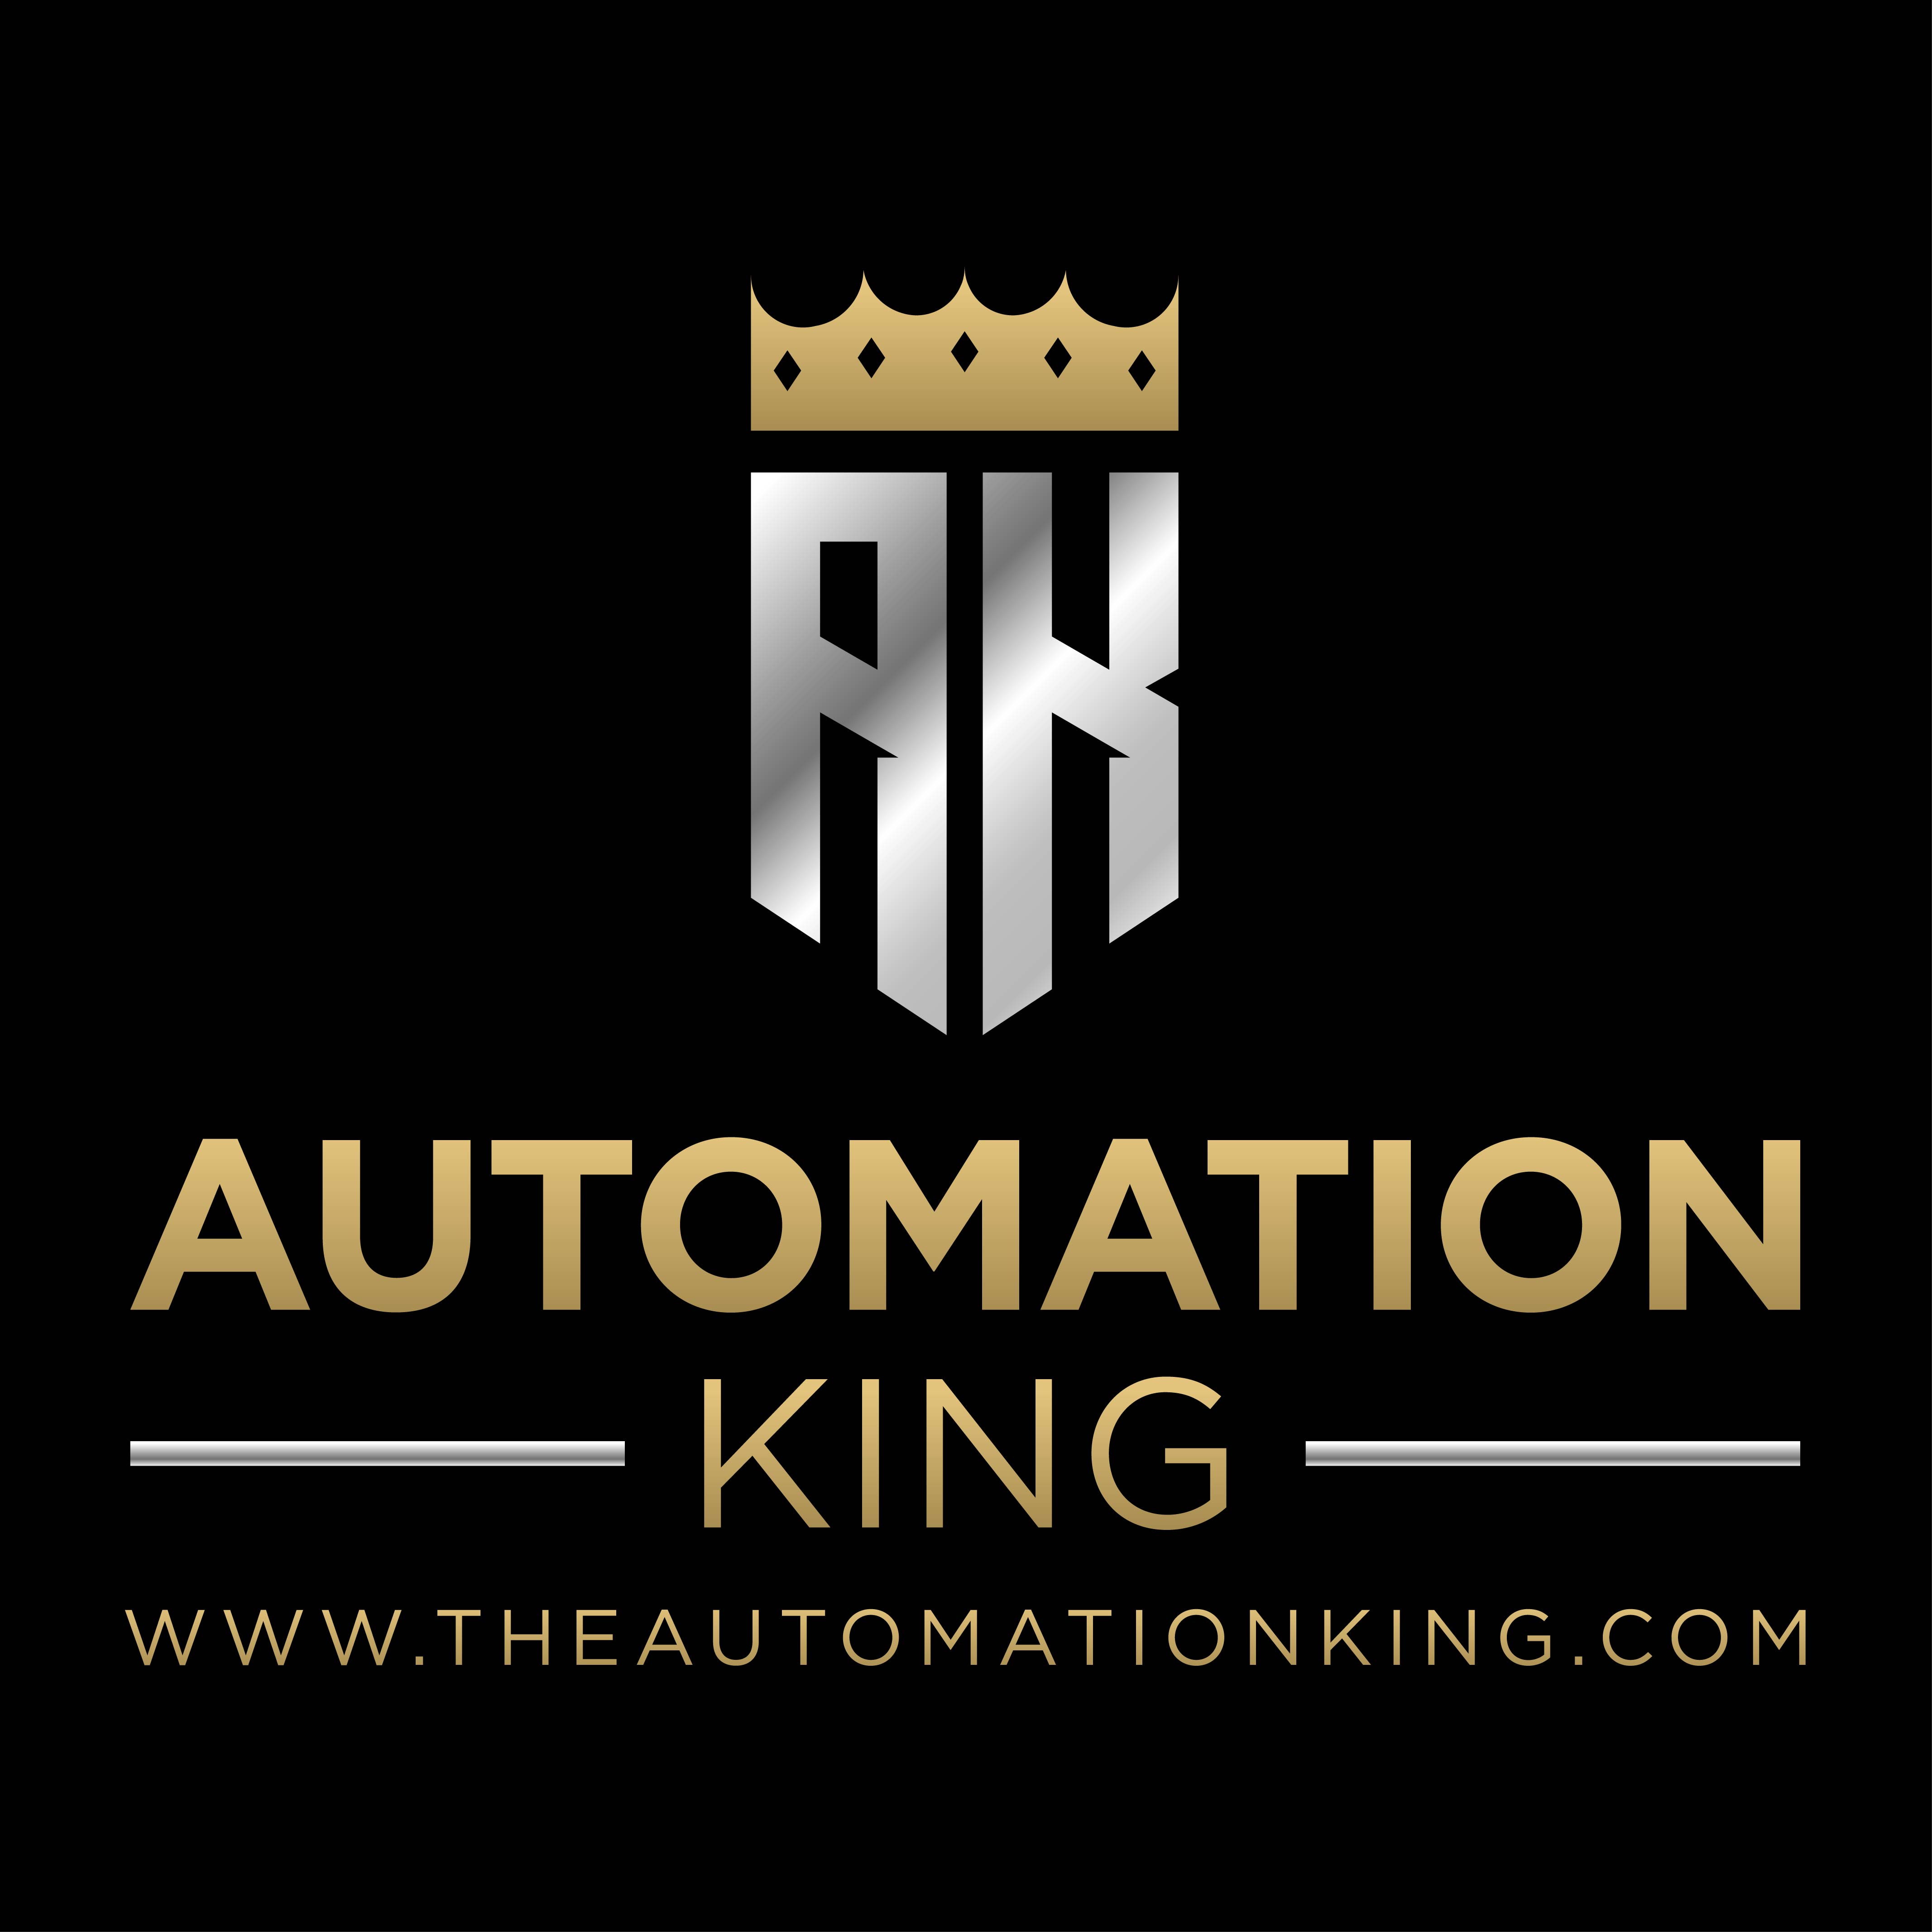 Automate your income